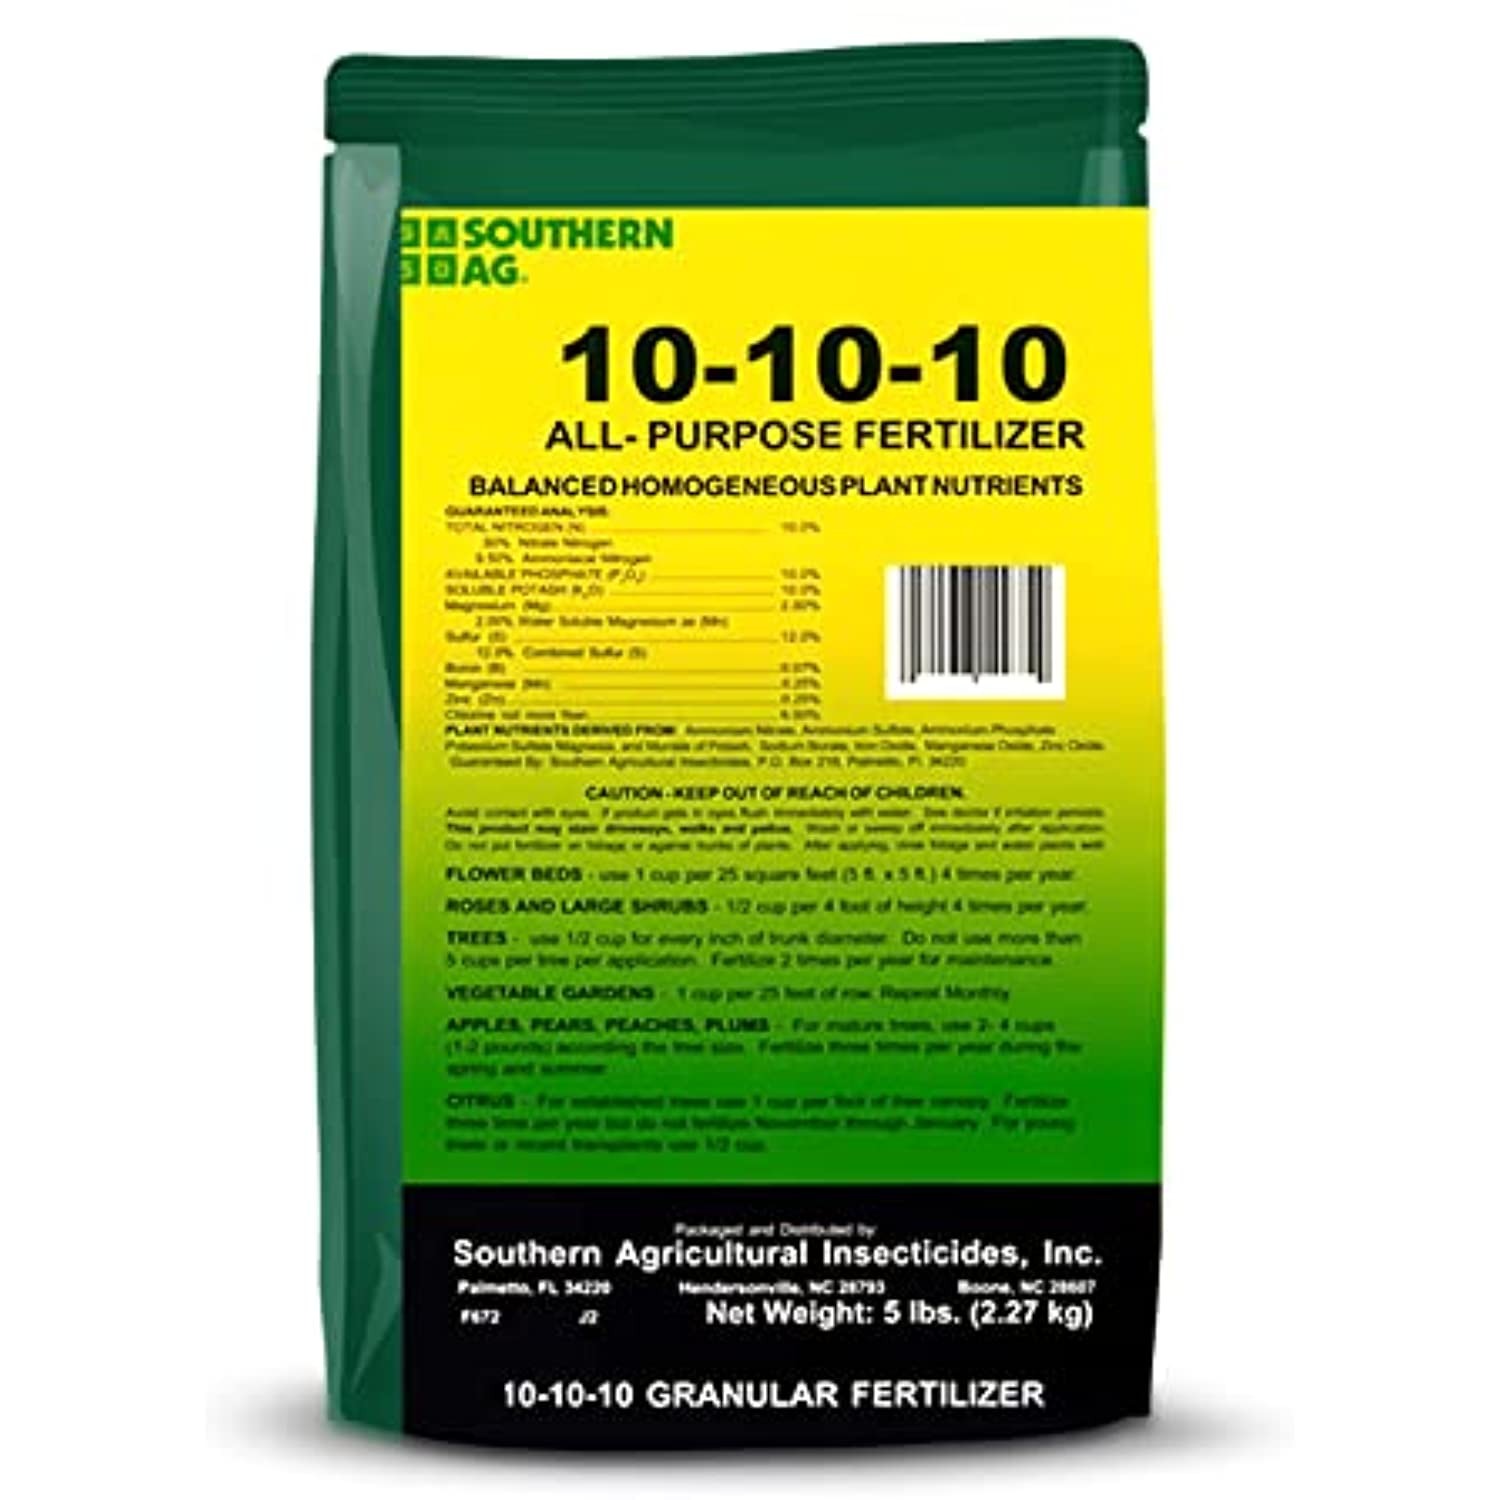 Southern Ag Fertilizer 10-10-10 - All-purpose Granular Fertilizer - organic fertilizer – Fertilizer for vegetable garden & Flowerbed Roses & Large Shrubs and Fruit Trees- Available with Premium Quality Centaurus AZ Gloves-5LB